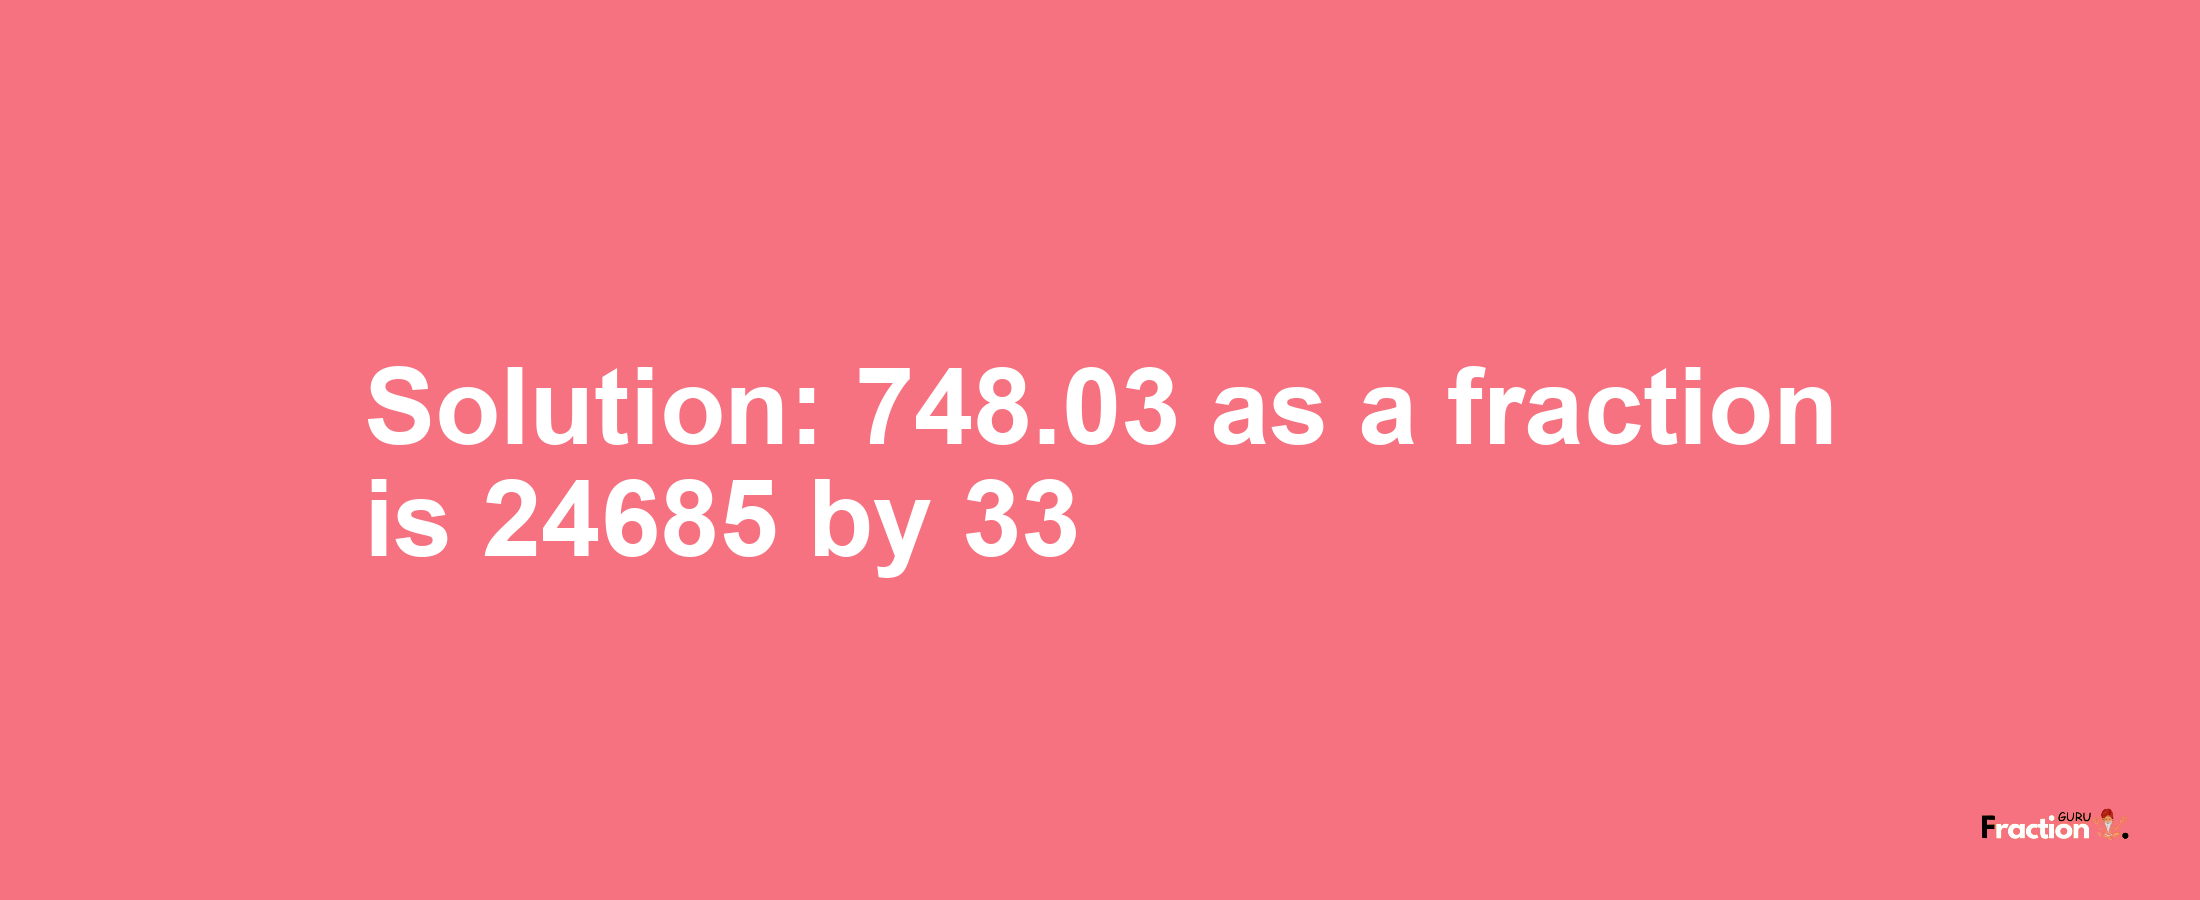 Solution:748.03 as a fraction is 24685/33